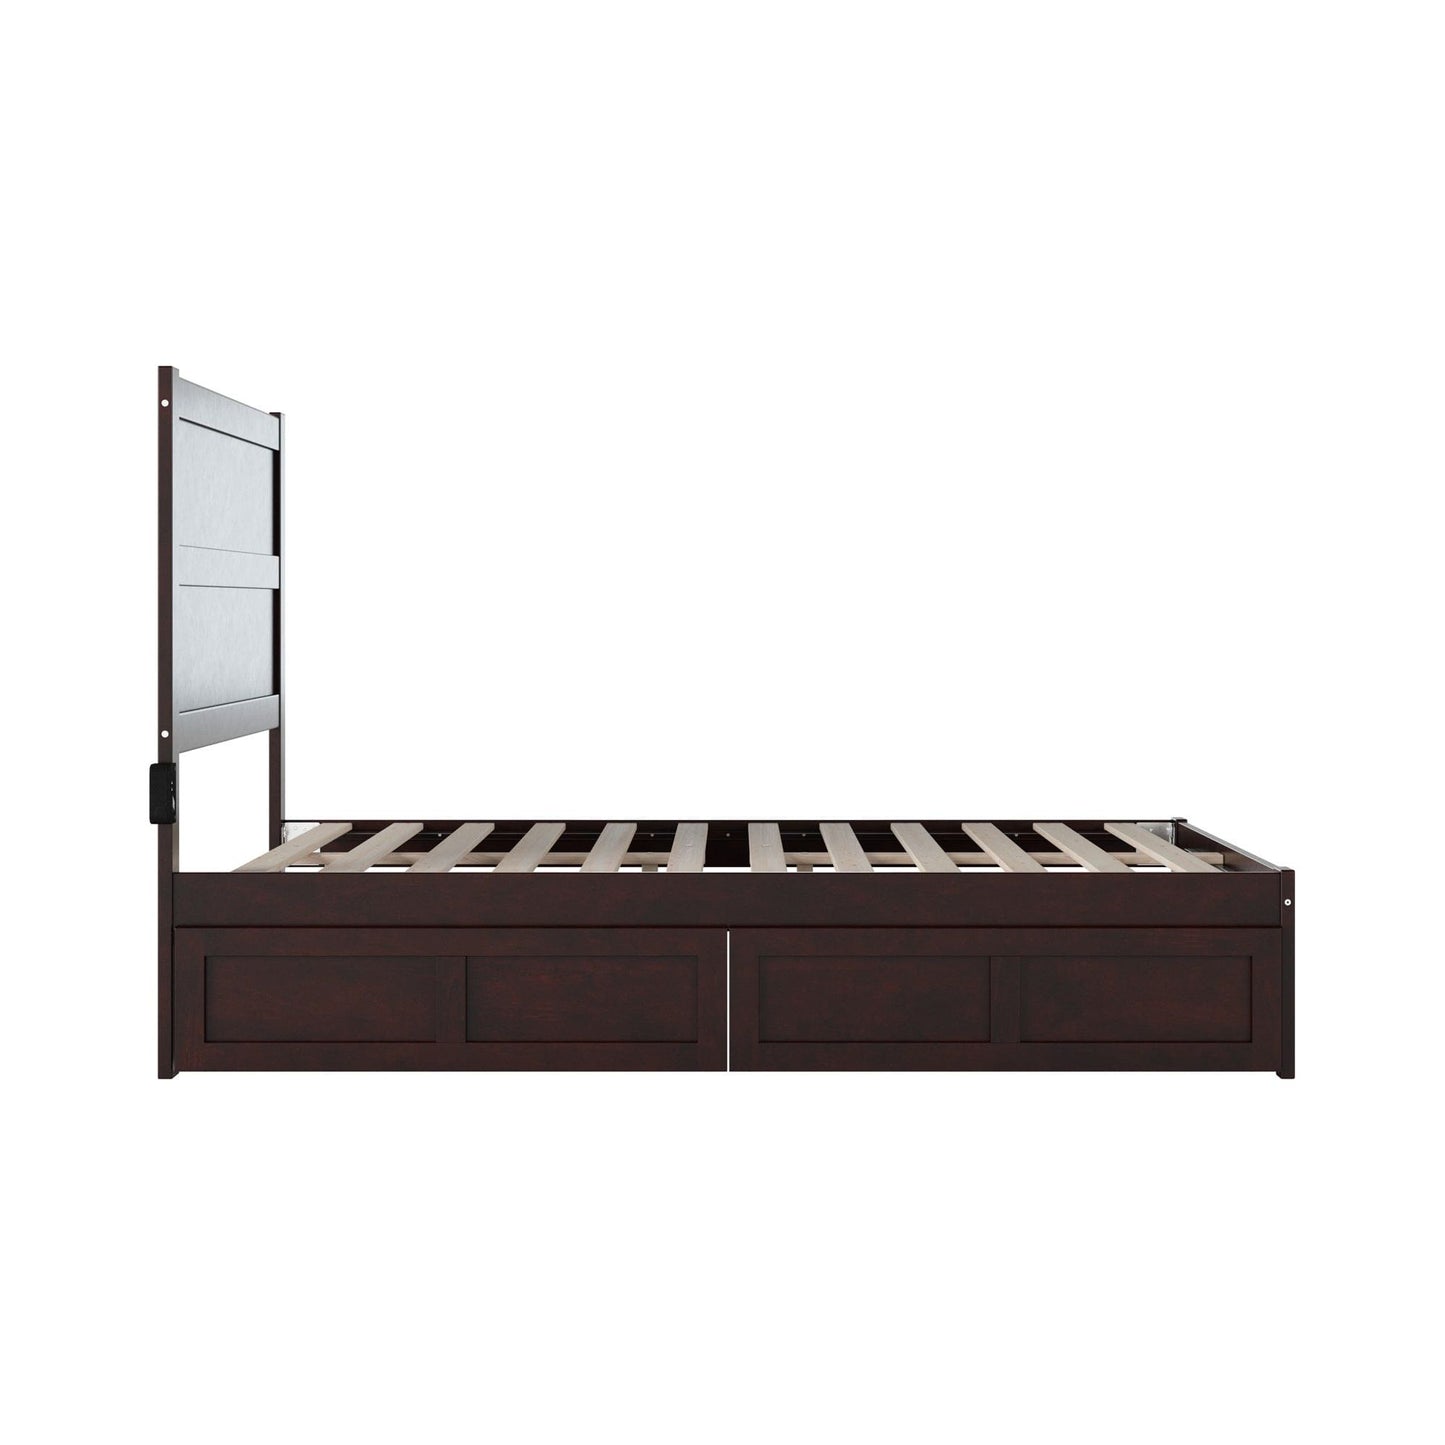 AFI Furnishings NoHo Full Bed with 2 Drawers in Espresso AG9113331